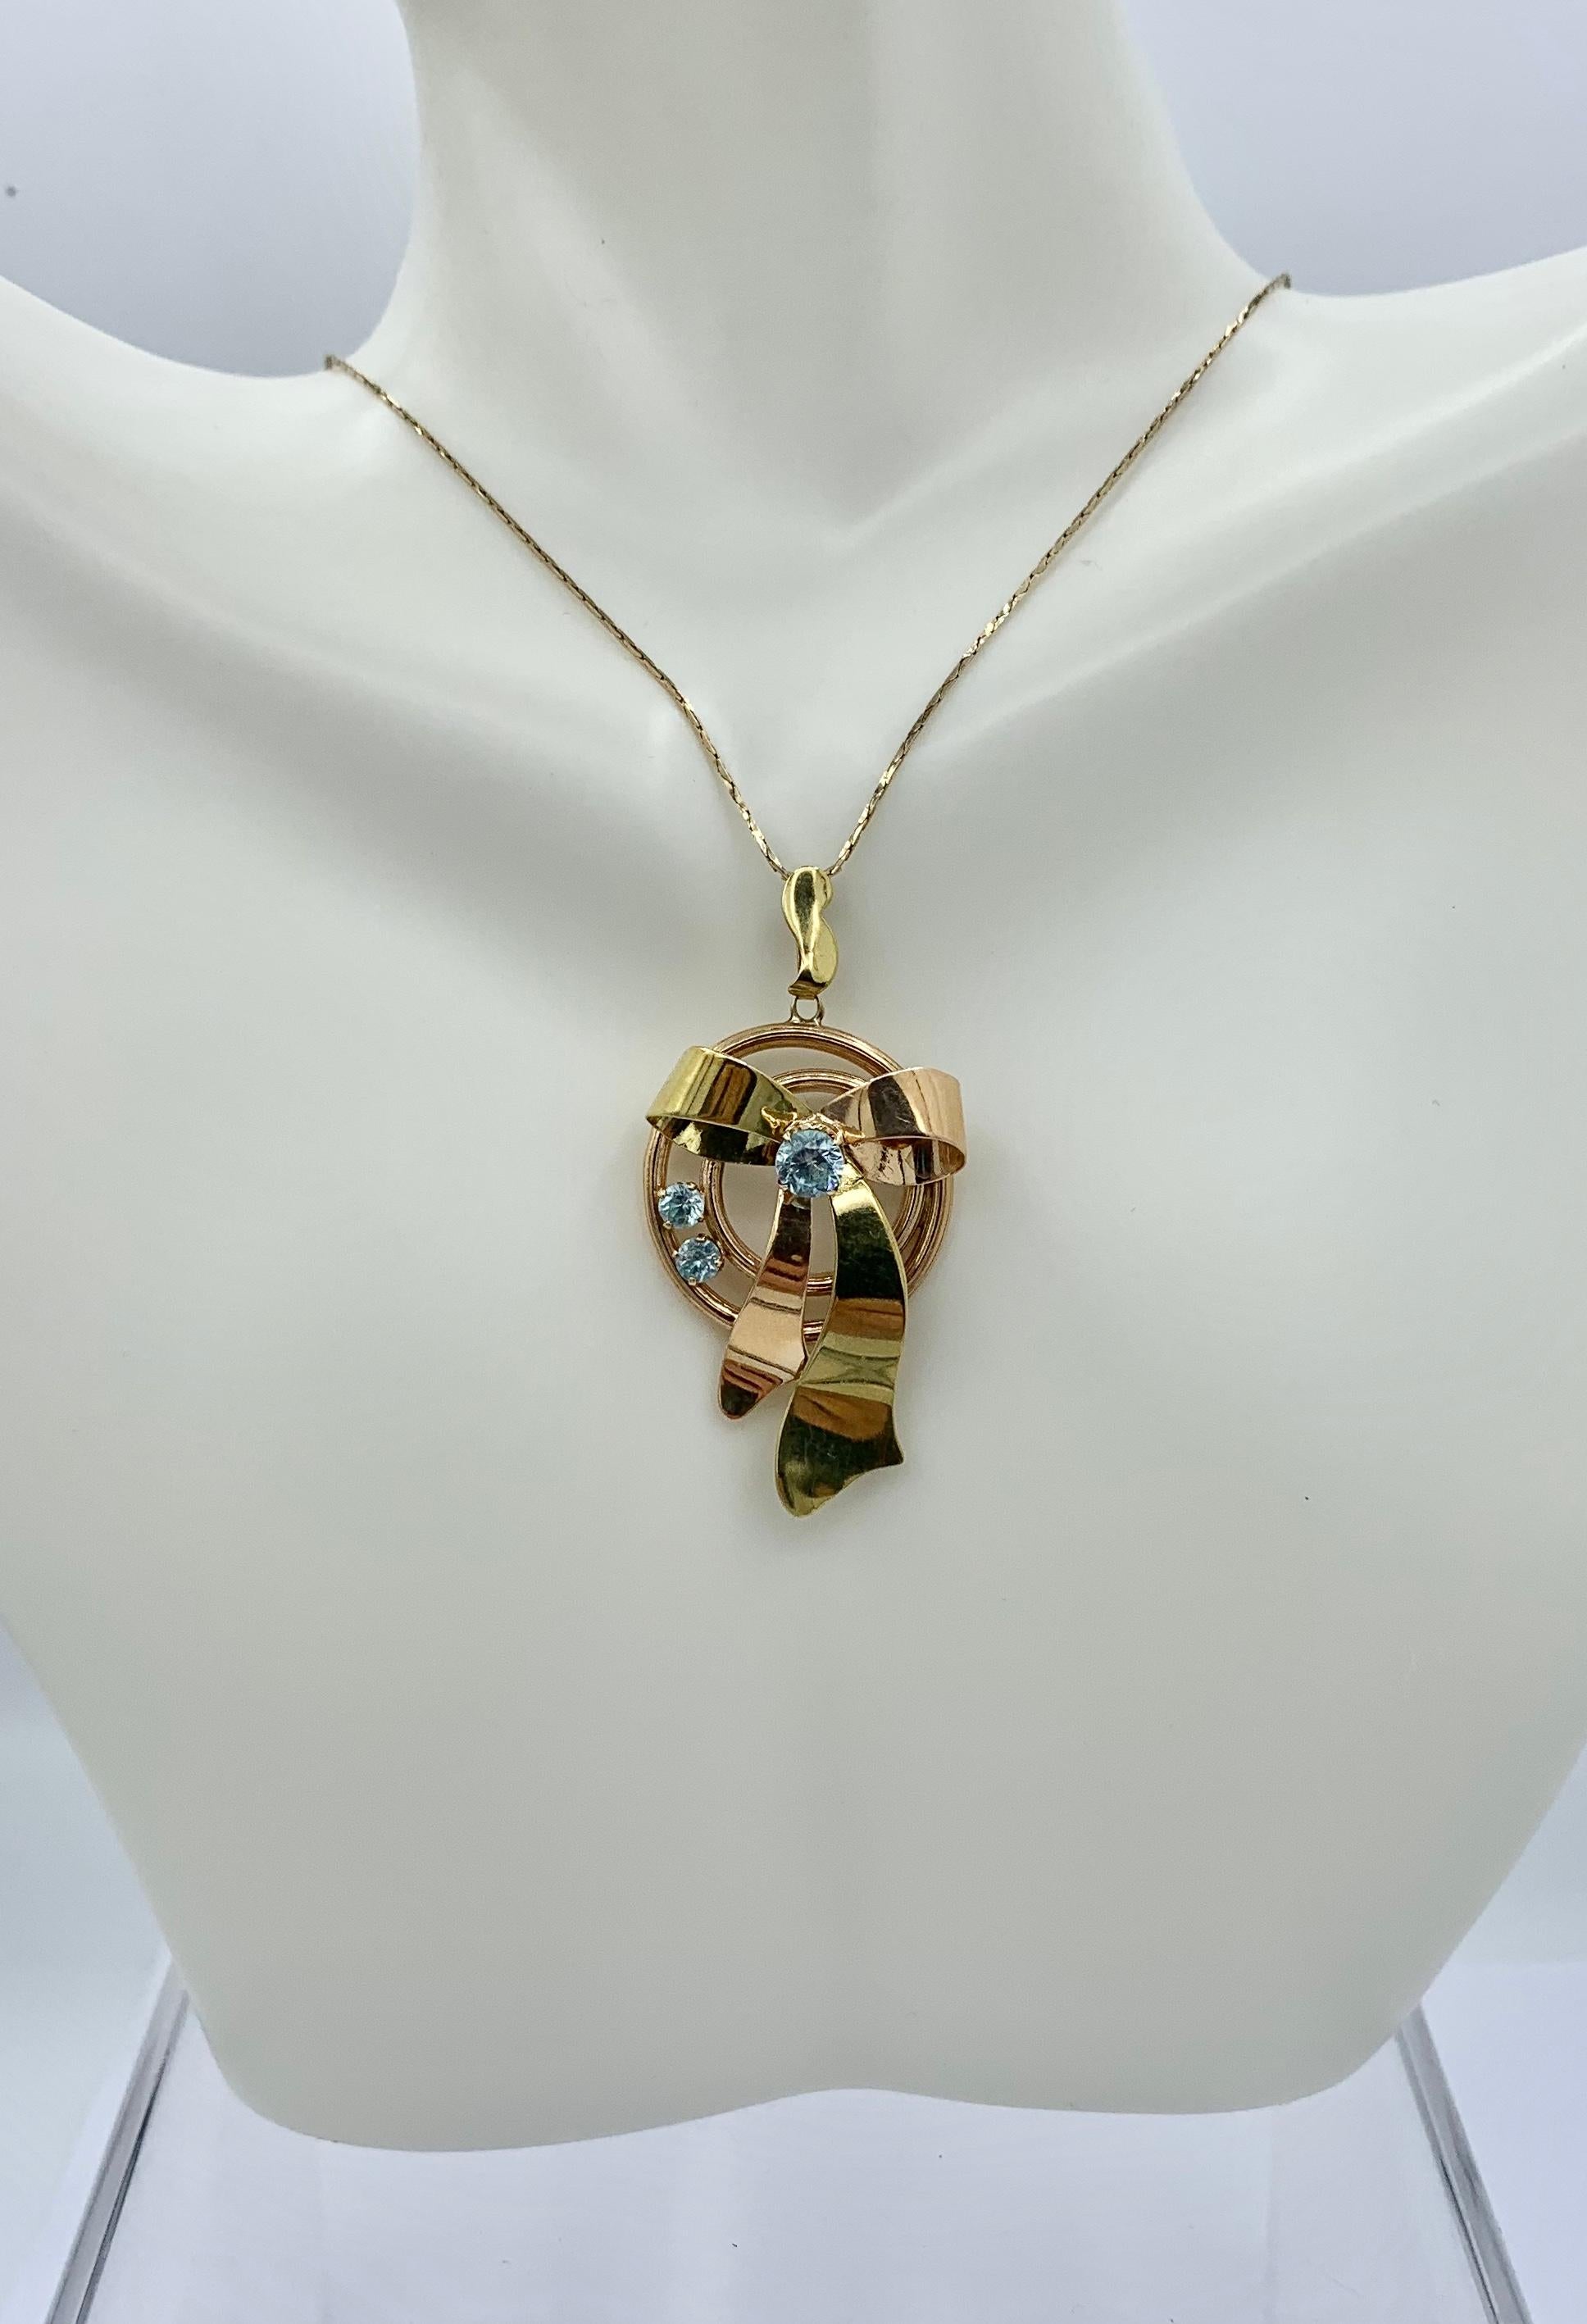 This is a stunning Retro Mid-Century stylized ribbon bow motif pendant set with a three gorgeous round faceted blue Zircon gems in 10 Karat Rose Gold.  Zircons and Rose Gold epitomize the Retro Mid-Century jewels and the color combination of the